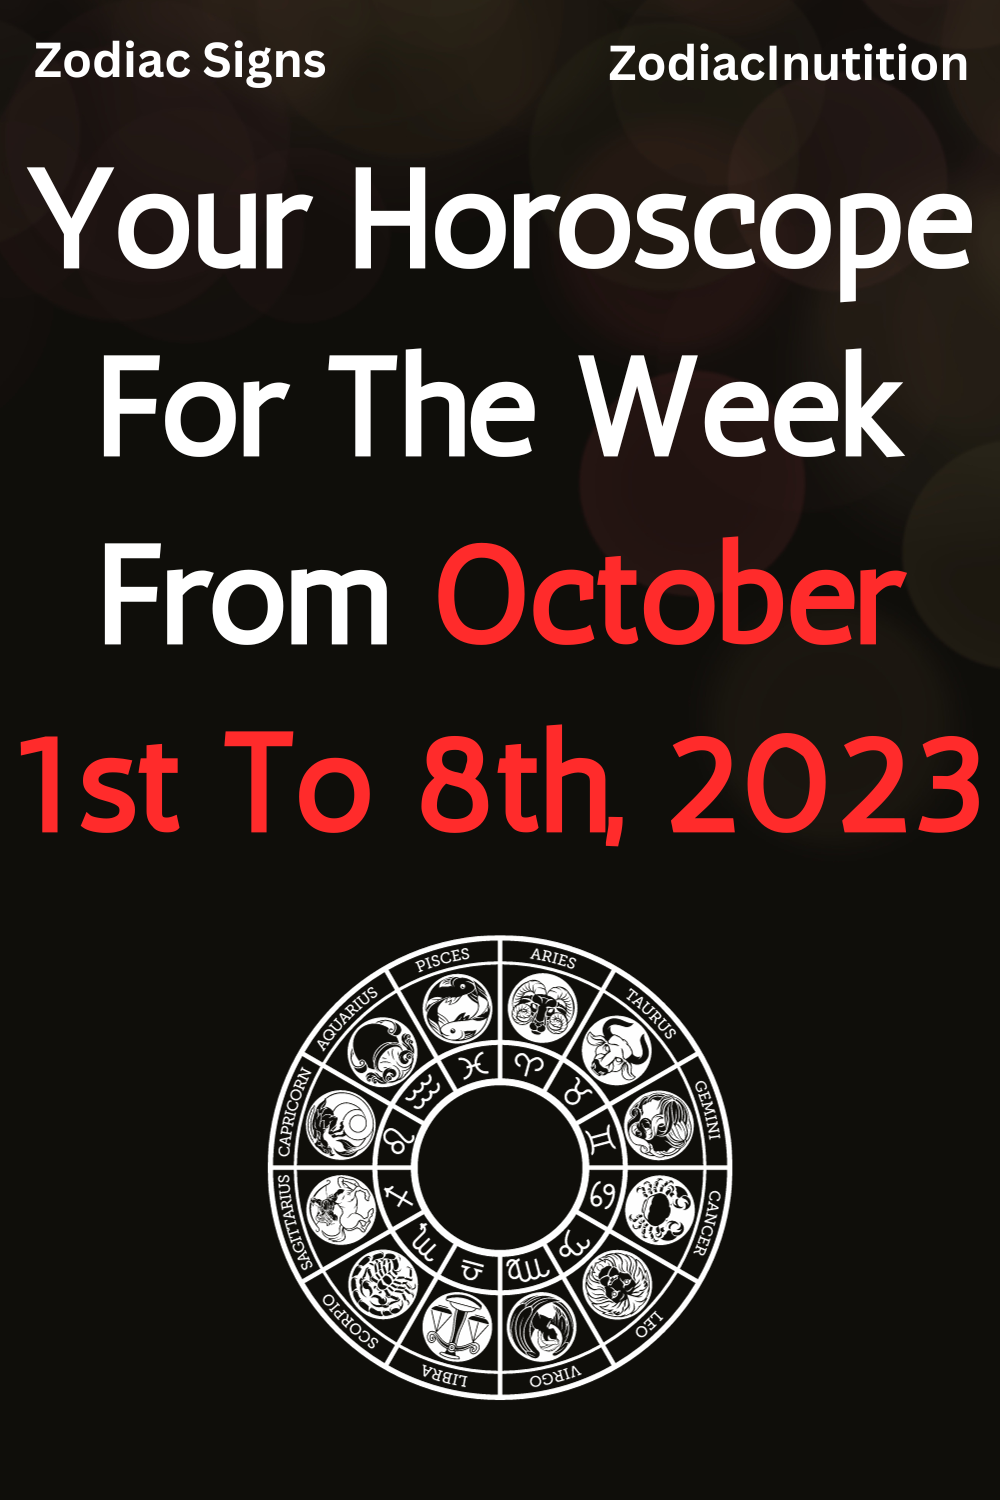 Your Horoscope For The Week From October 1st To 8th, 2023